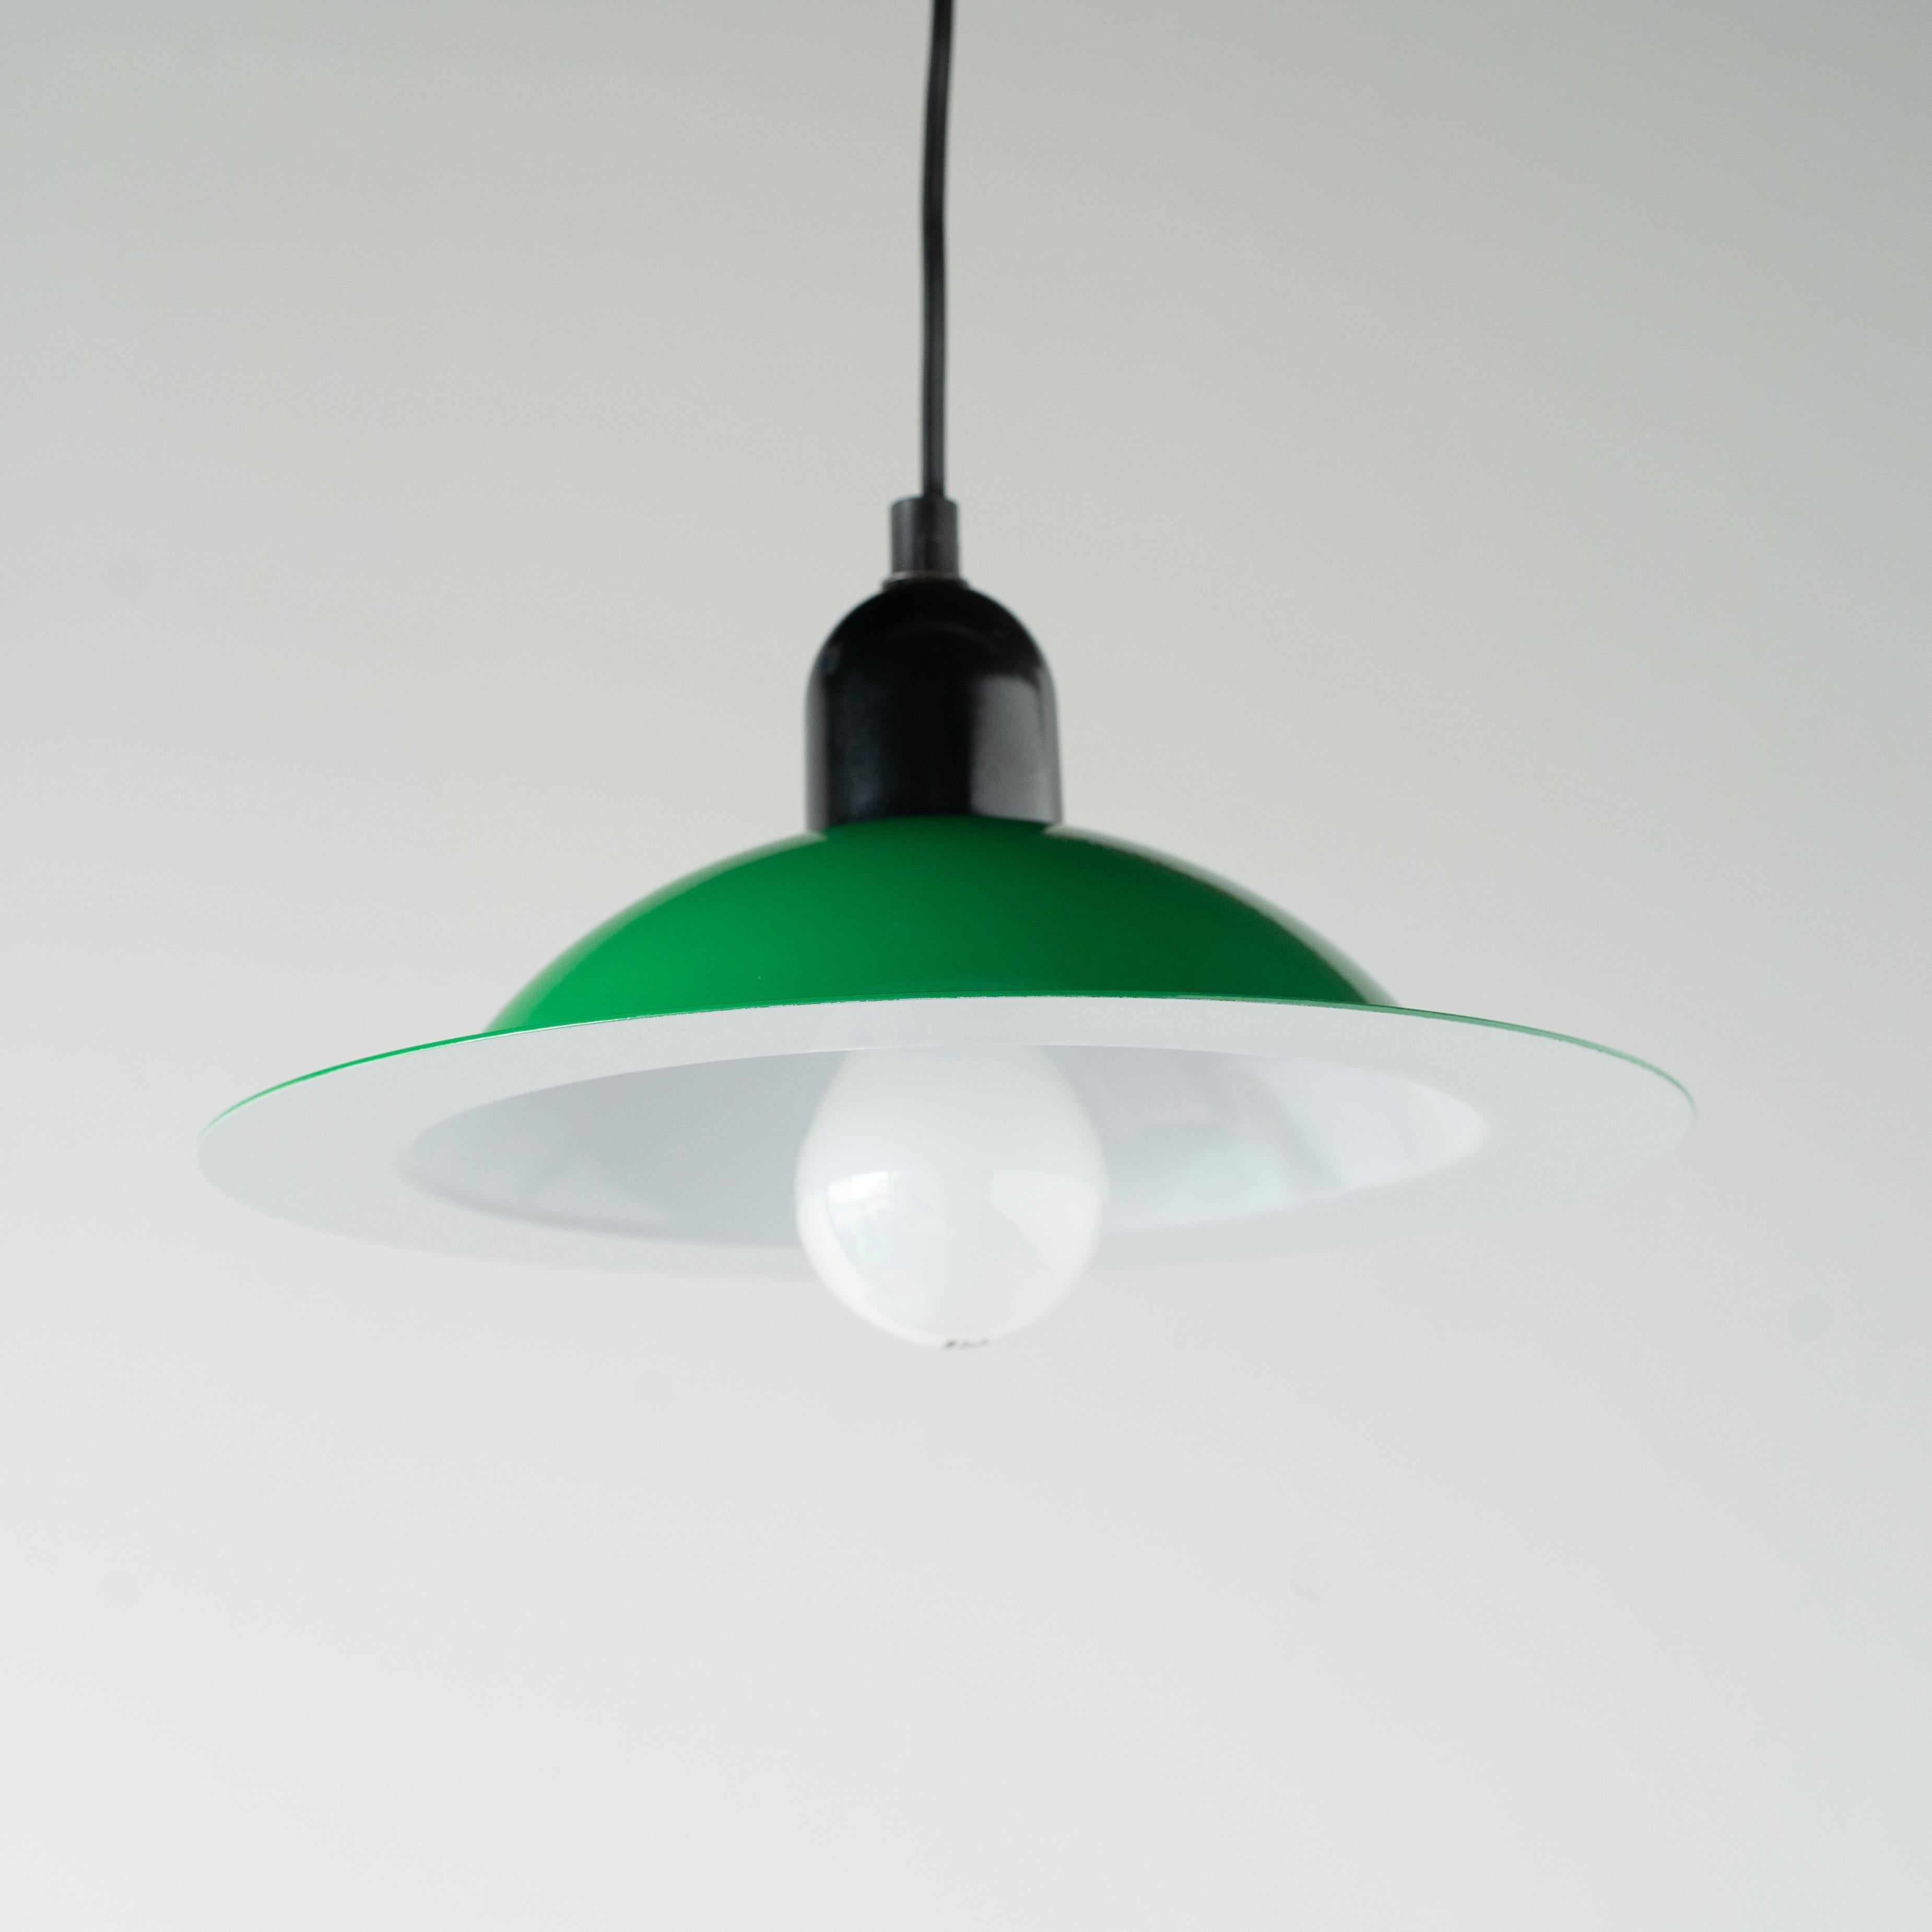 Steel pendant lamp designed by De pas D'urbino Lomazzi for Stilnovo. It was designed in the 70s. Shade color is green, cable is black. 
New old stock in box. Excellent condition.

Probably 80s or 90s production piece. 
E26 light bulb.

